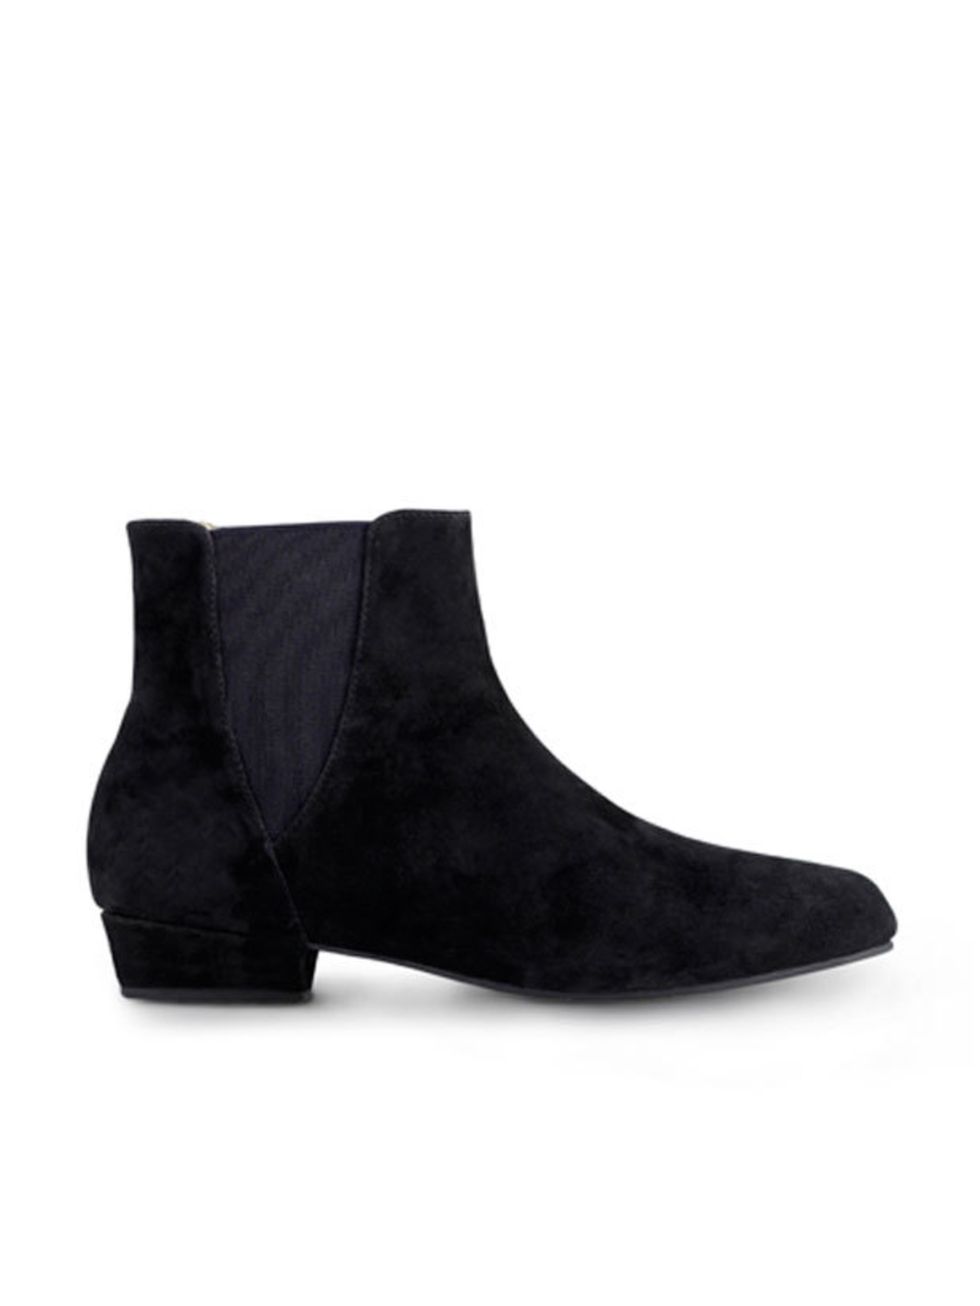 <p>Bloch Chelsea boots, £155, at <a href="http://www.start-london.com/shop/index.php">Start</a></p>